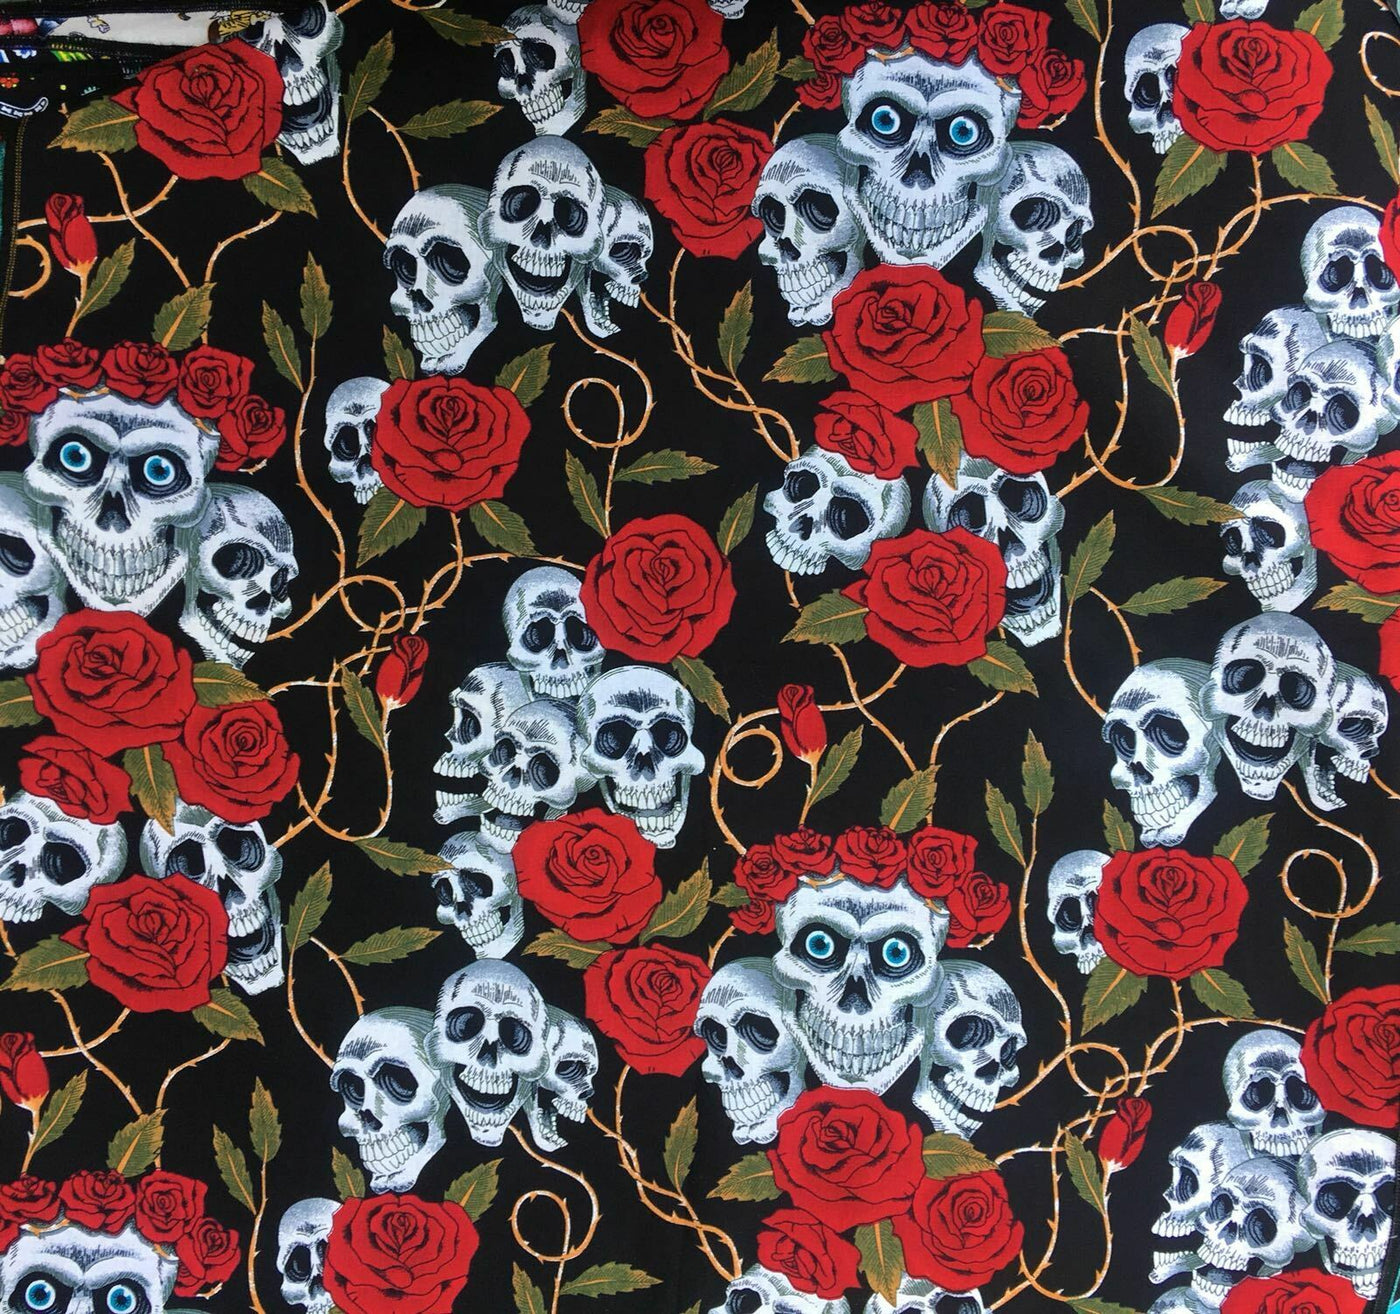 Red Royal Rose - Rose & Hubble - 100% Cotton Fabric